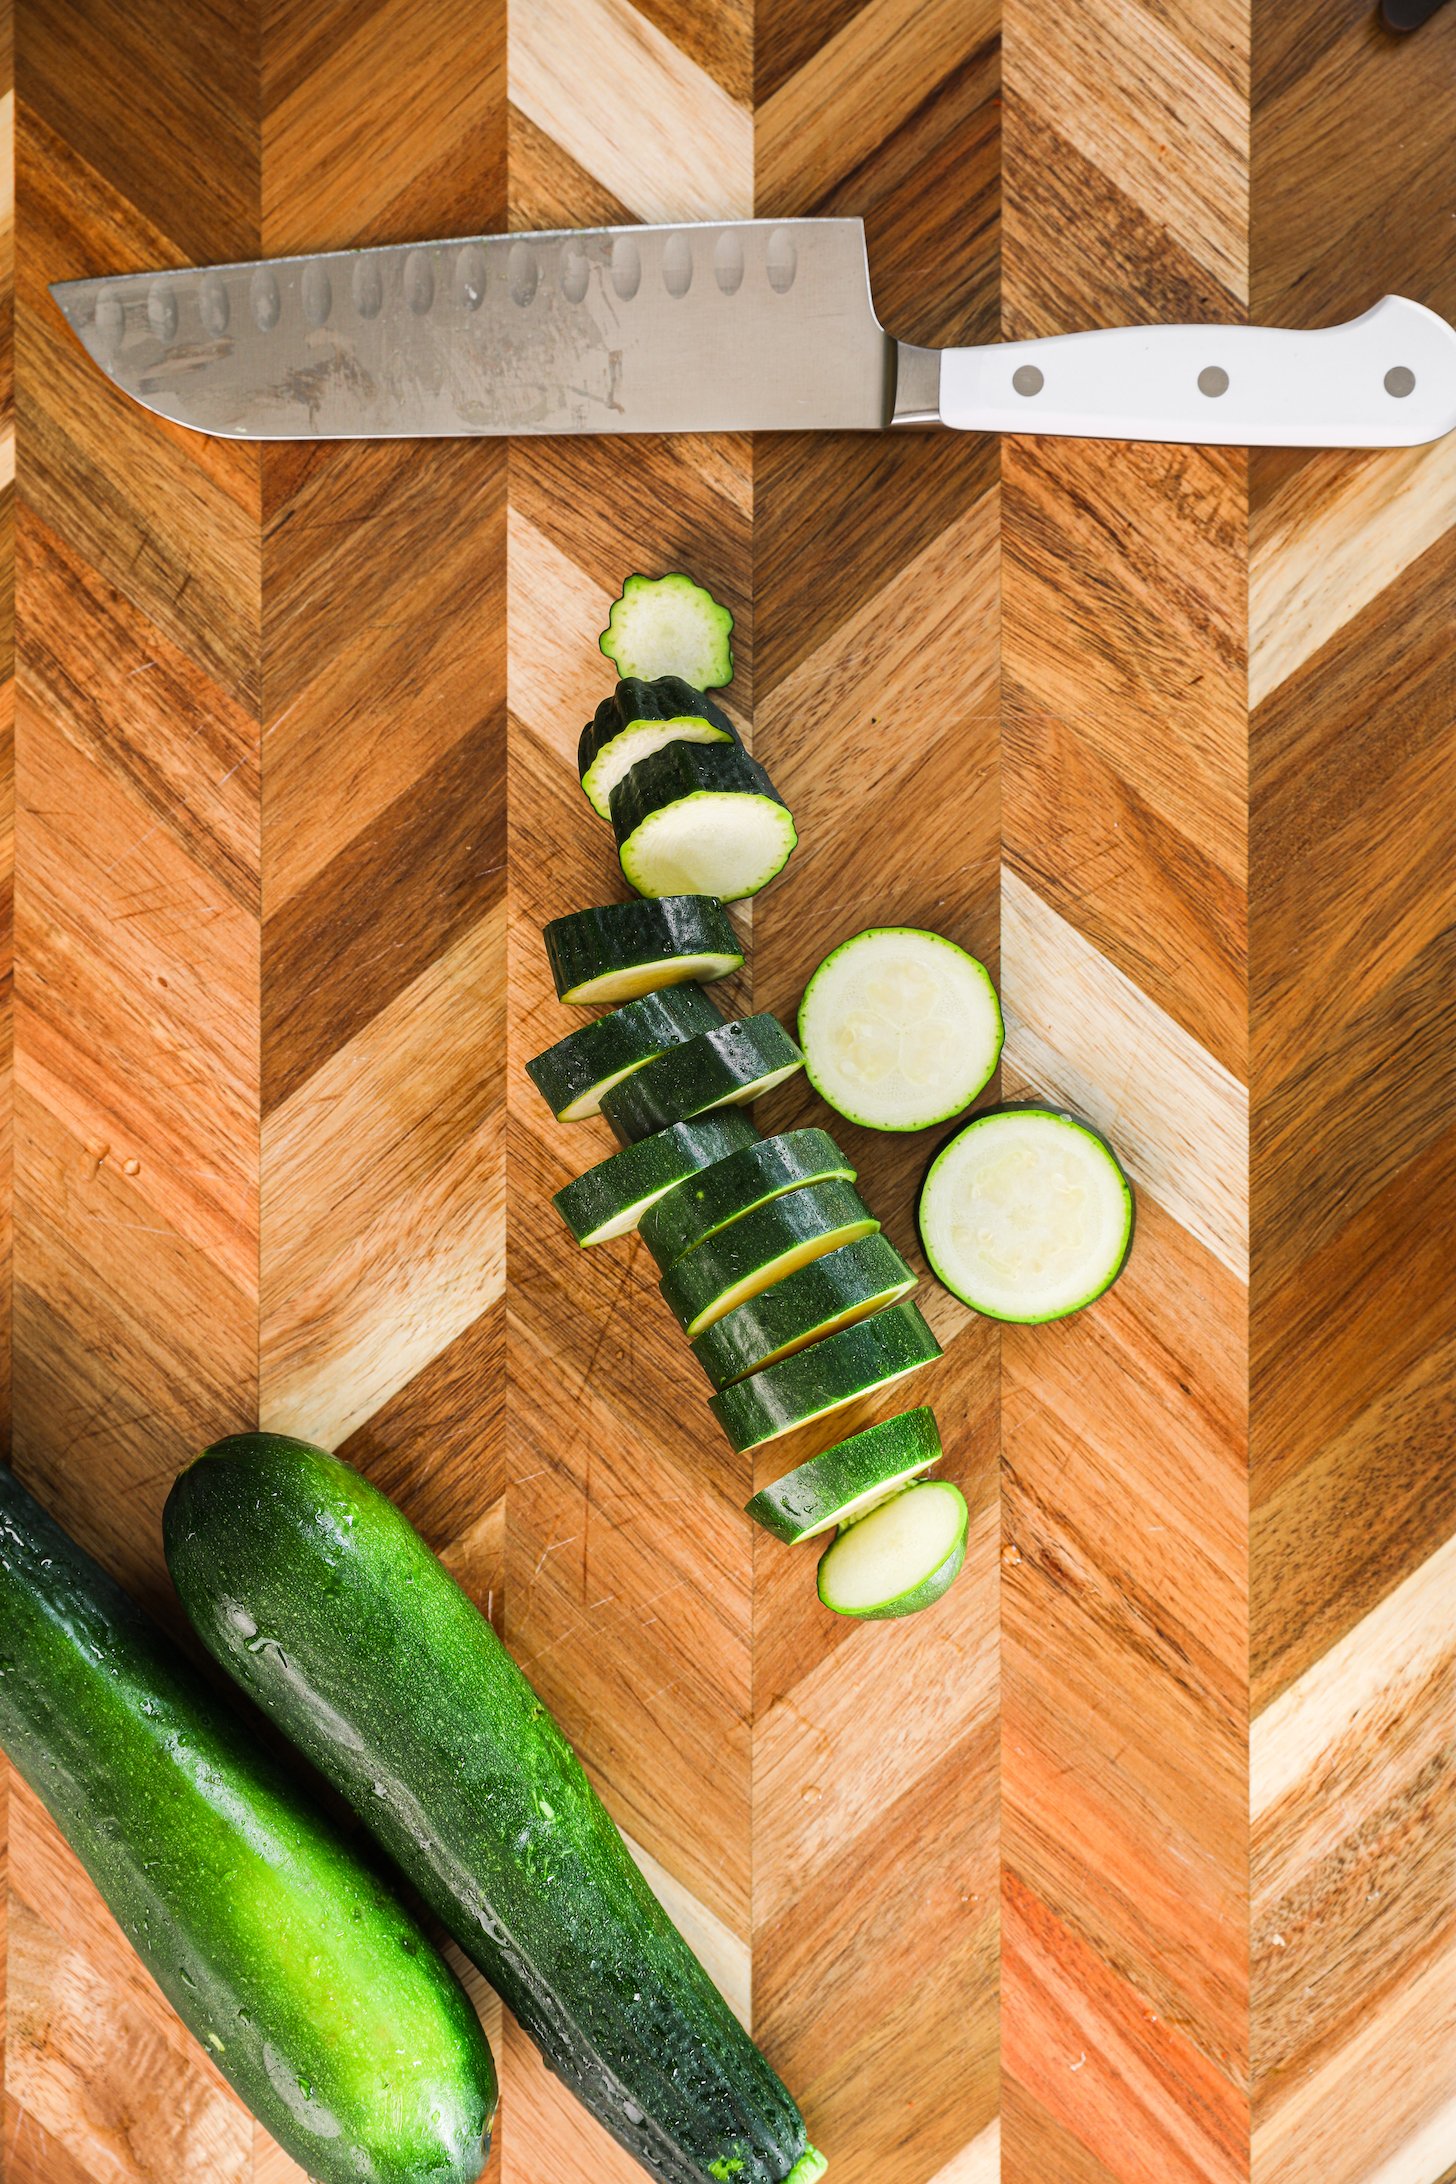 A collection of zucchini slices with a knife close by.